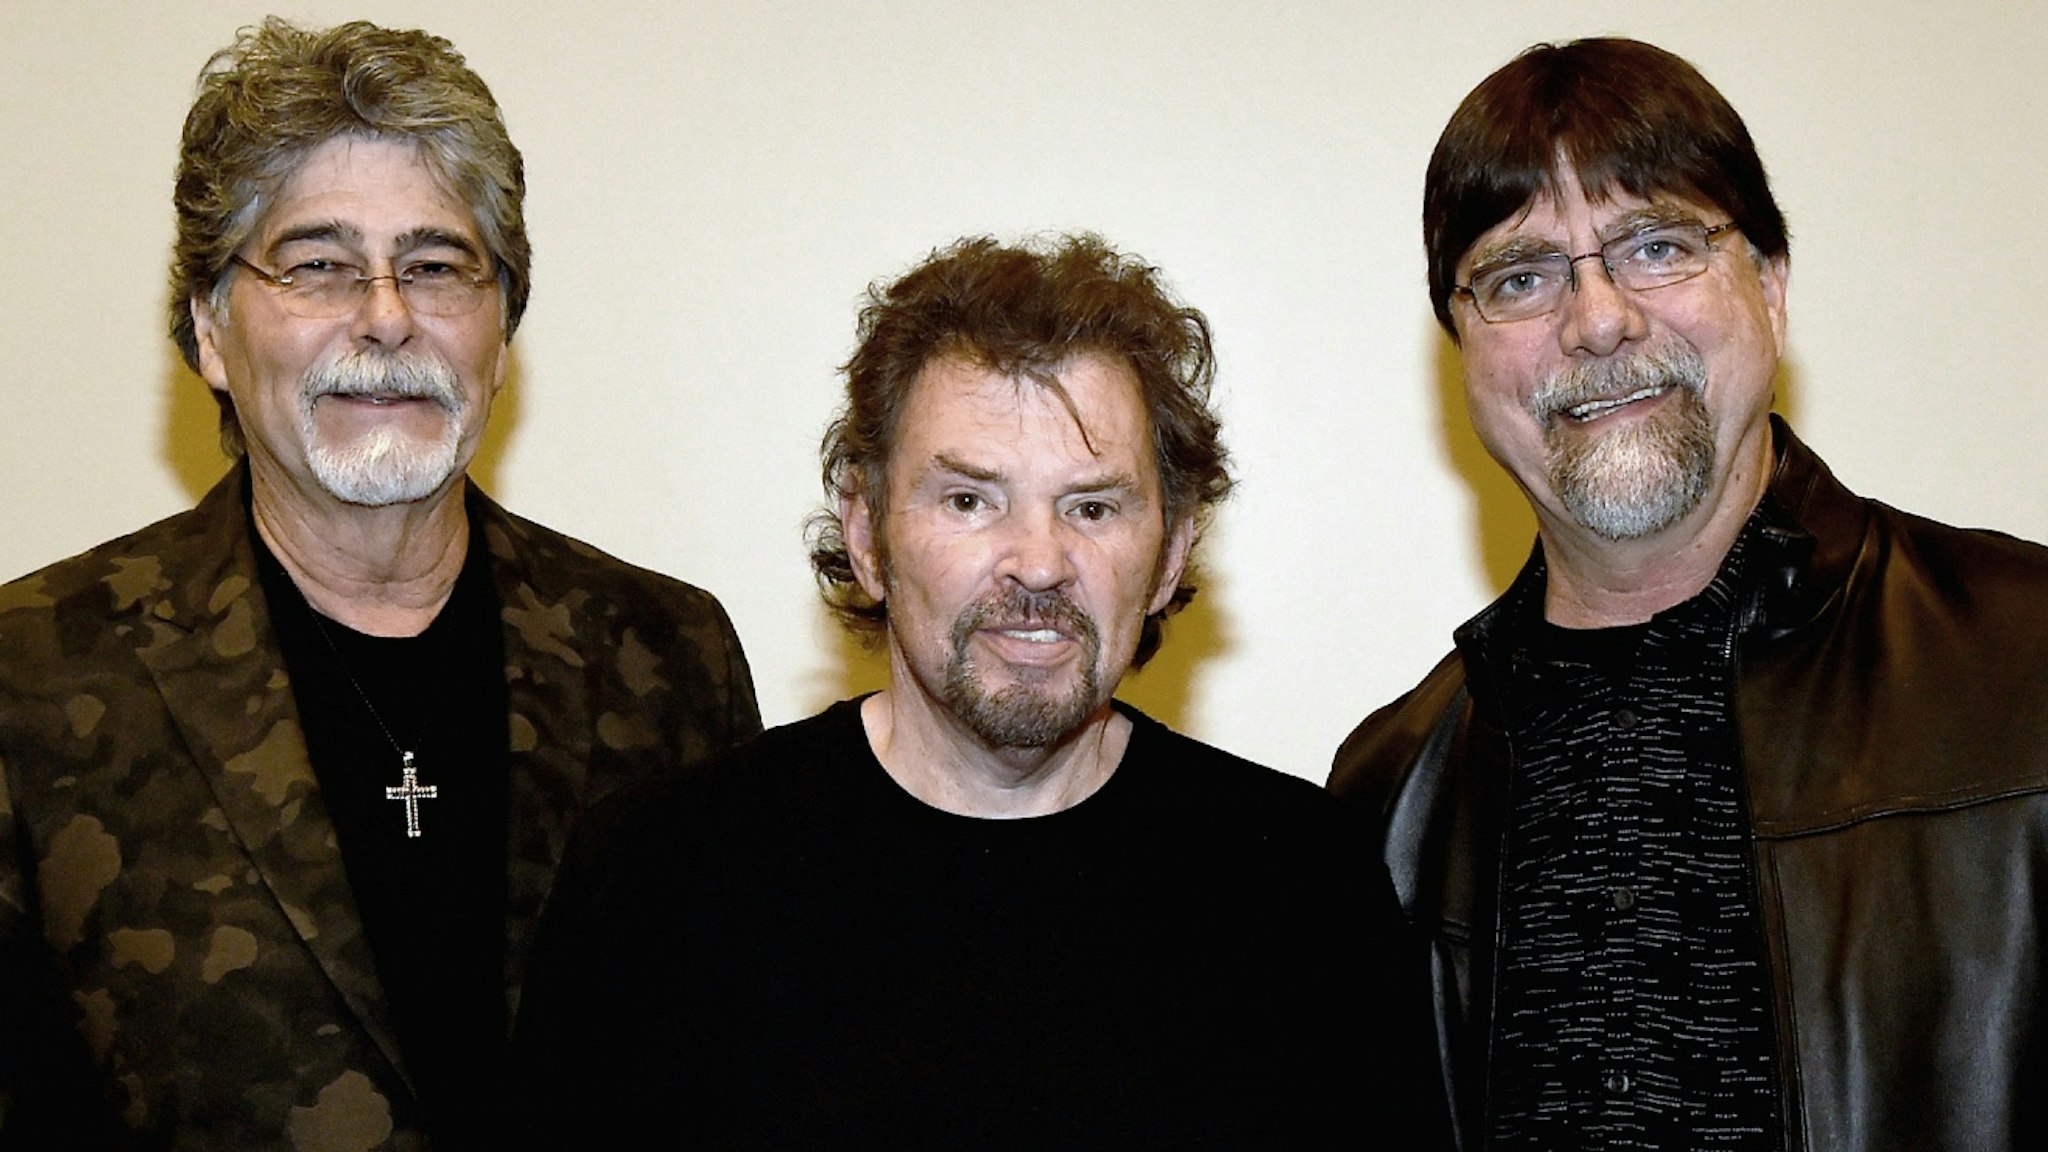 Alabama's Randy Owen, Jeff Cook and Teddy Gentry backstage during The Country Music Hall of Fame and Museum Presents an Interview with Alabama at The Country Music Hall of Fame and Museum in The CMA Theater on November 5, 2016 in Nashville, Tennessee.